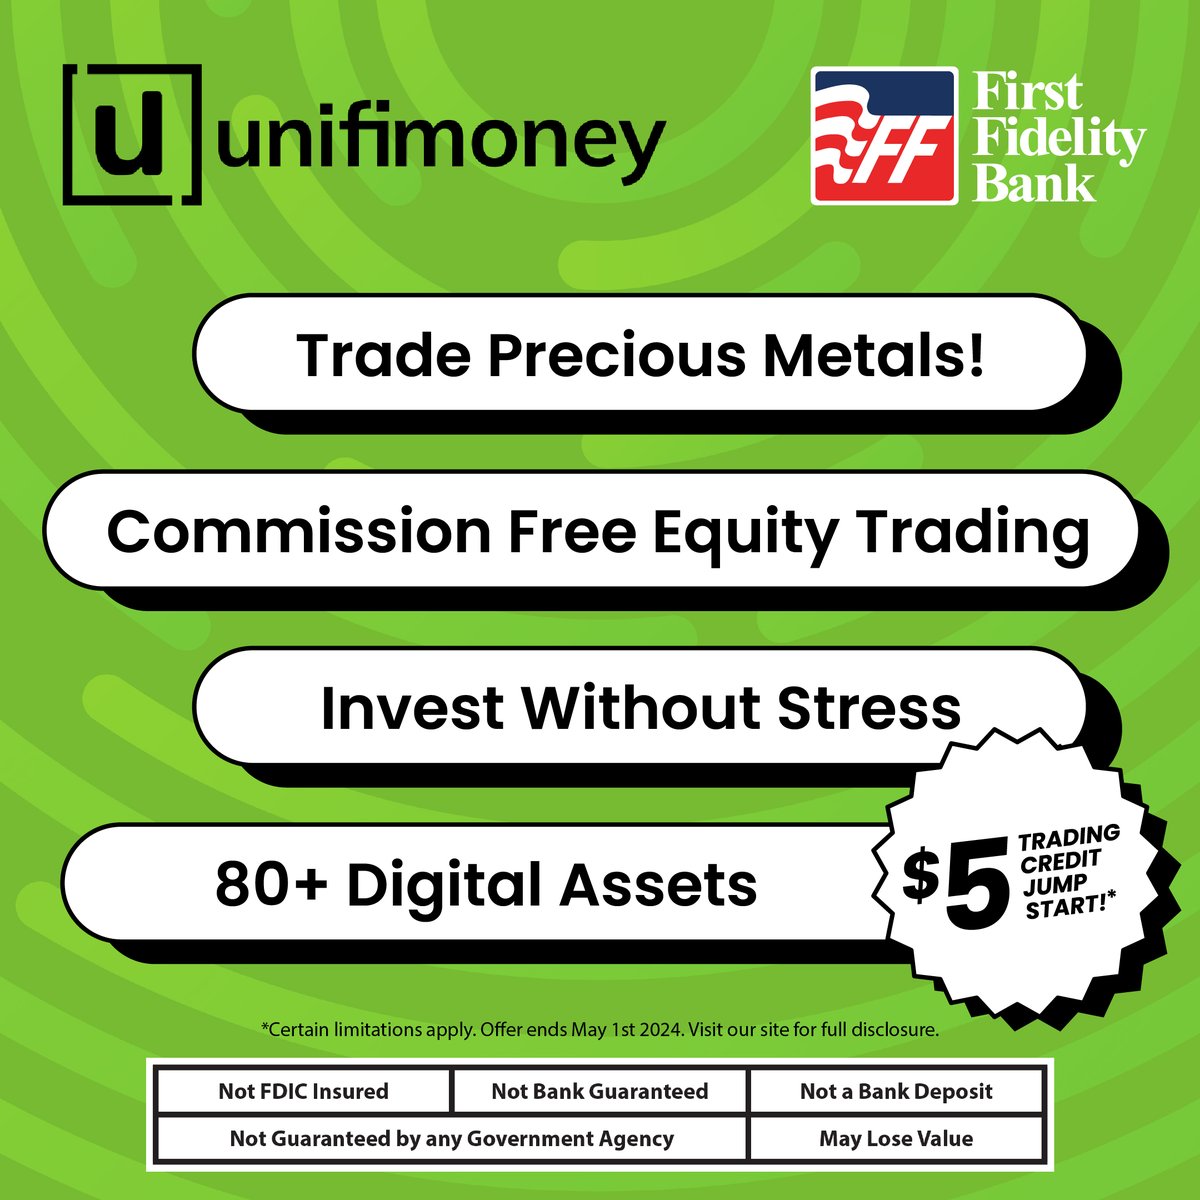 Get a $5 Trading Credit and start investing with Unifimoney! The user-friendly investment platform is accessible through your FFB banking app and helps you build your long-term investment portfolio. Offer ends May 1st, 2024. bit.ly/4amsQ5r